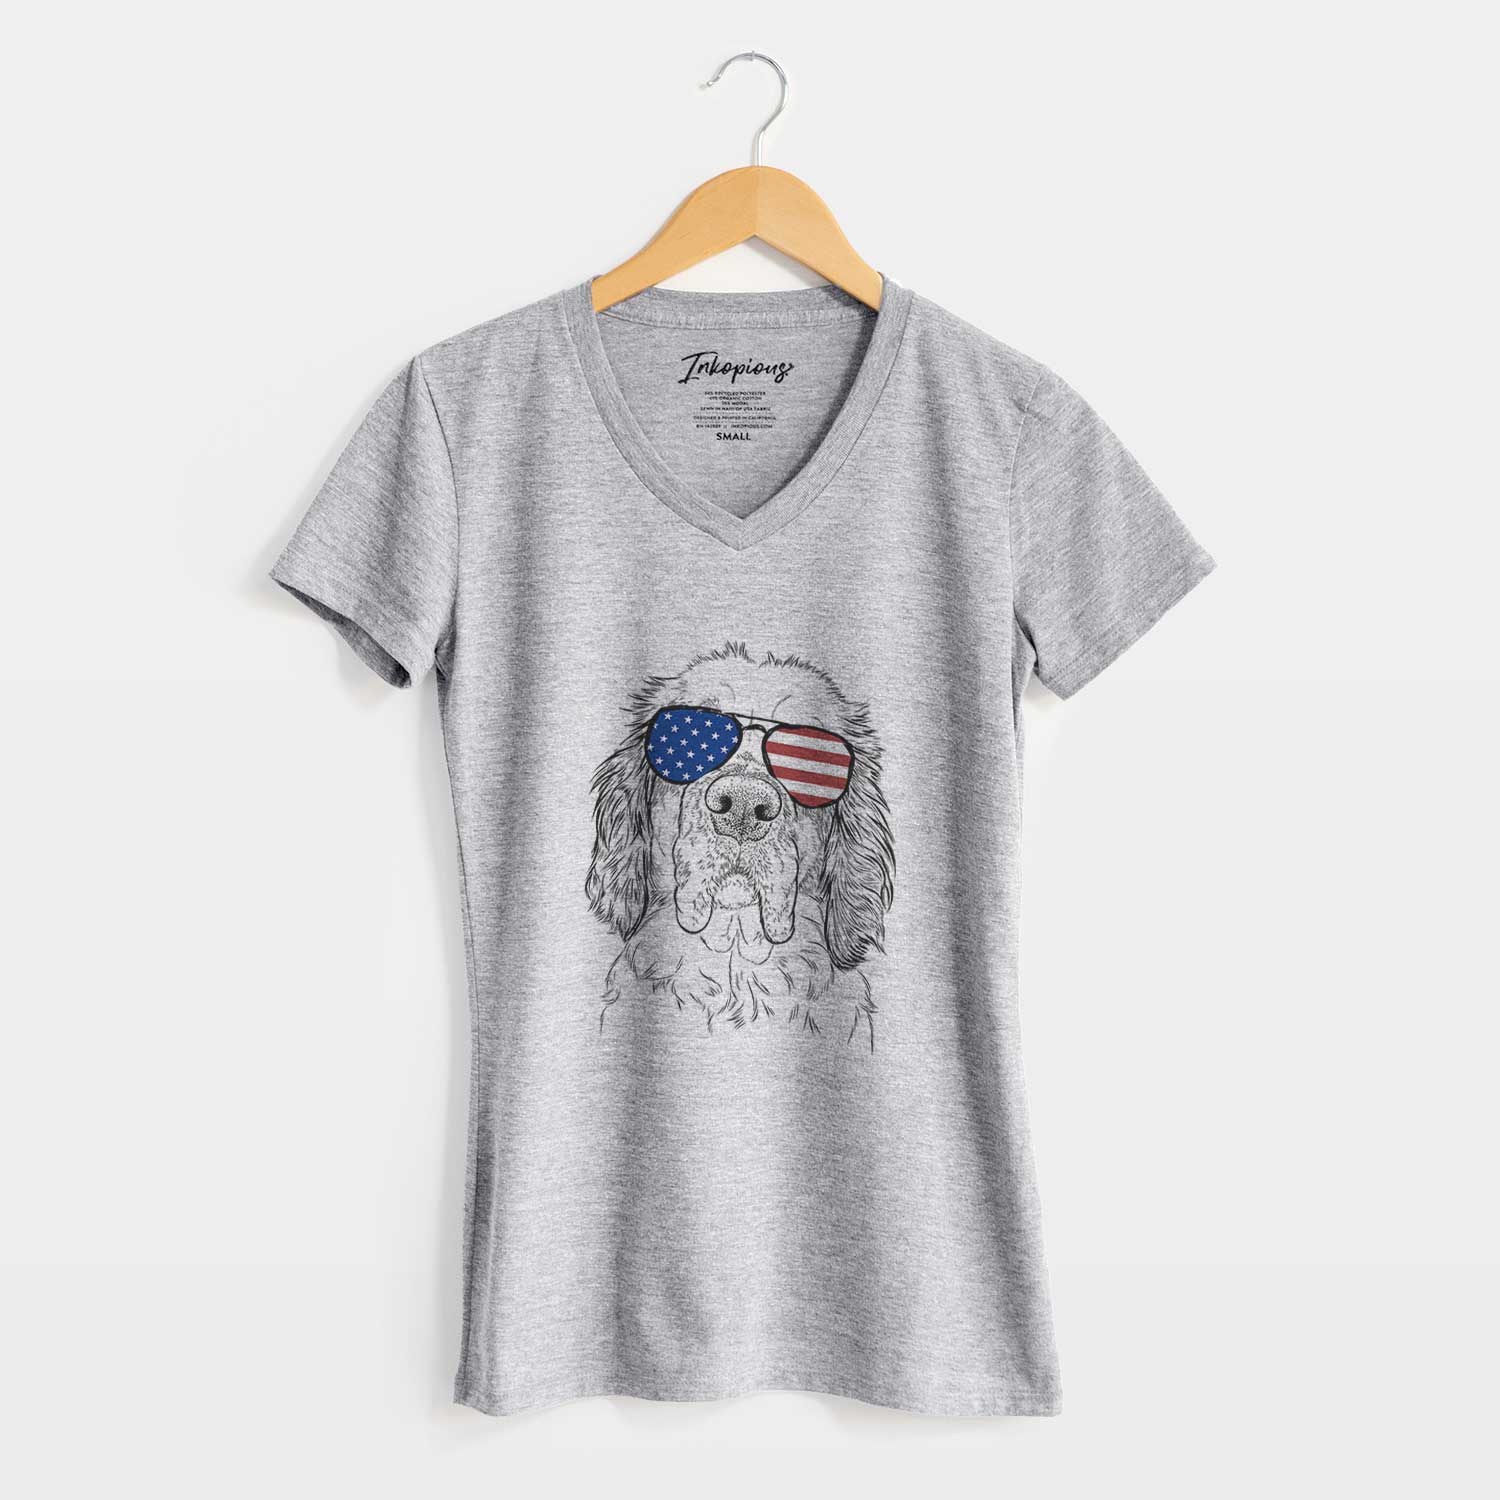 USA Sully the Clumber Spaniel - Women's Perfect V-neck Shirt